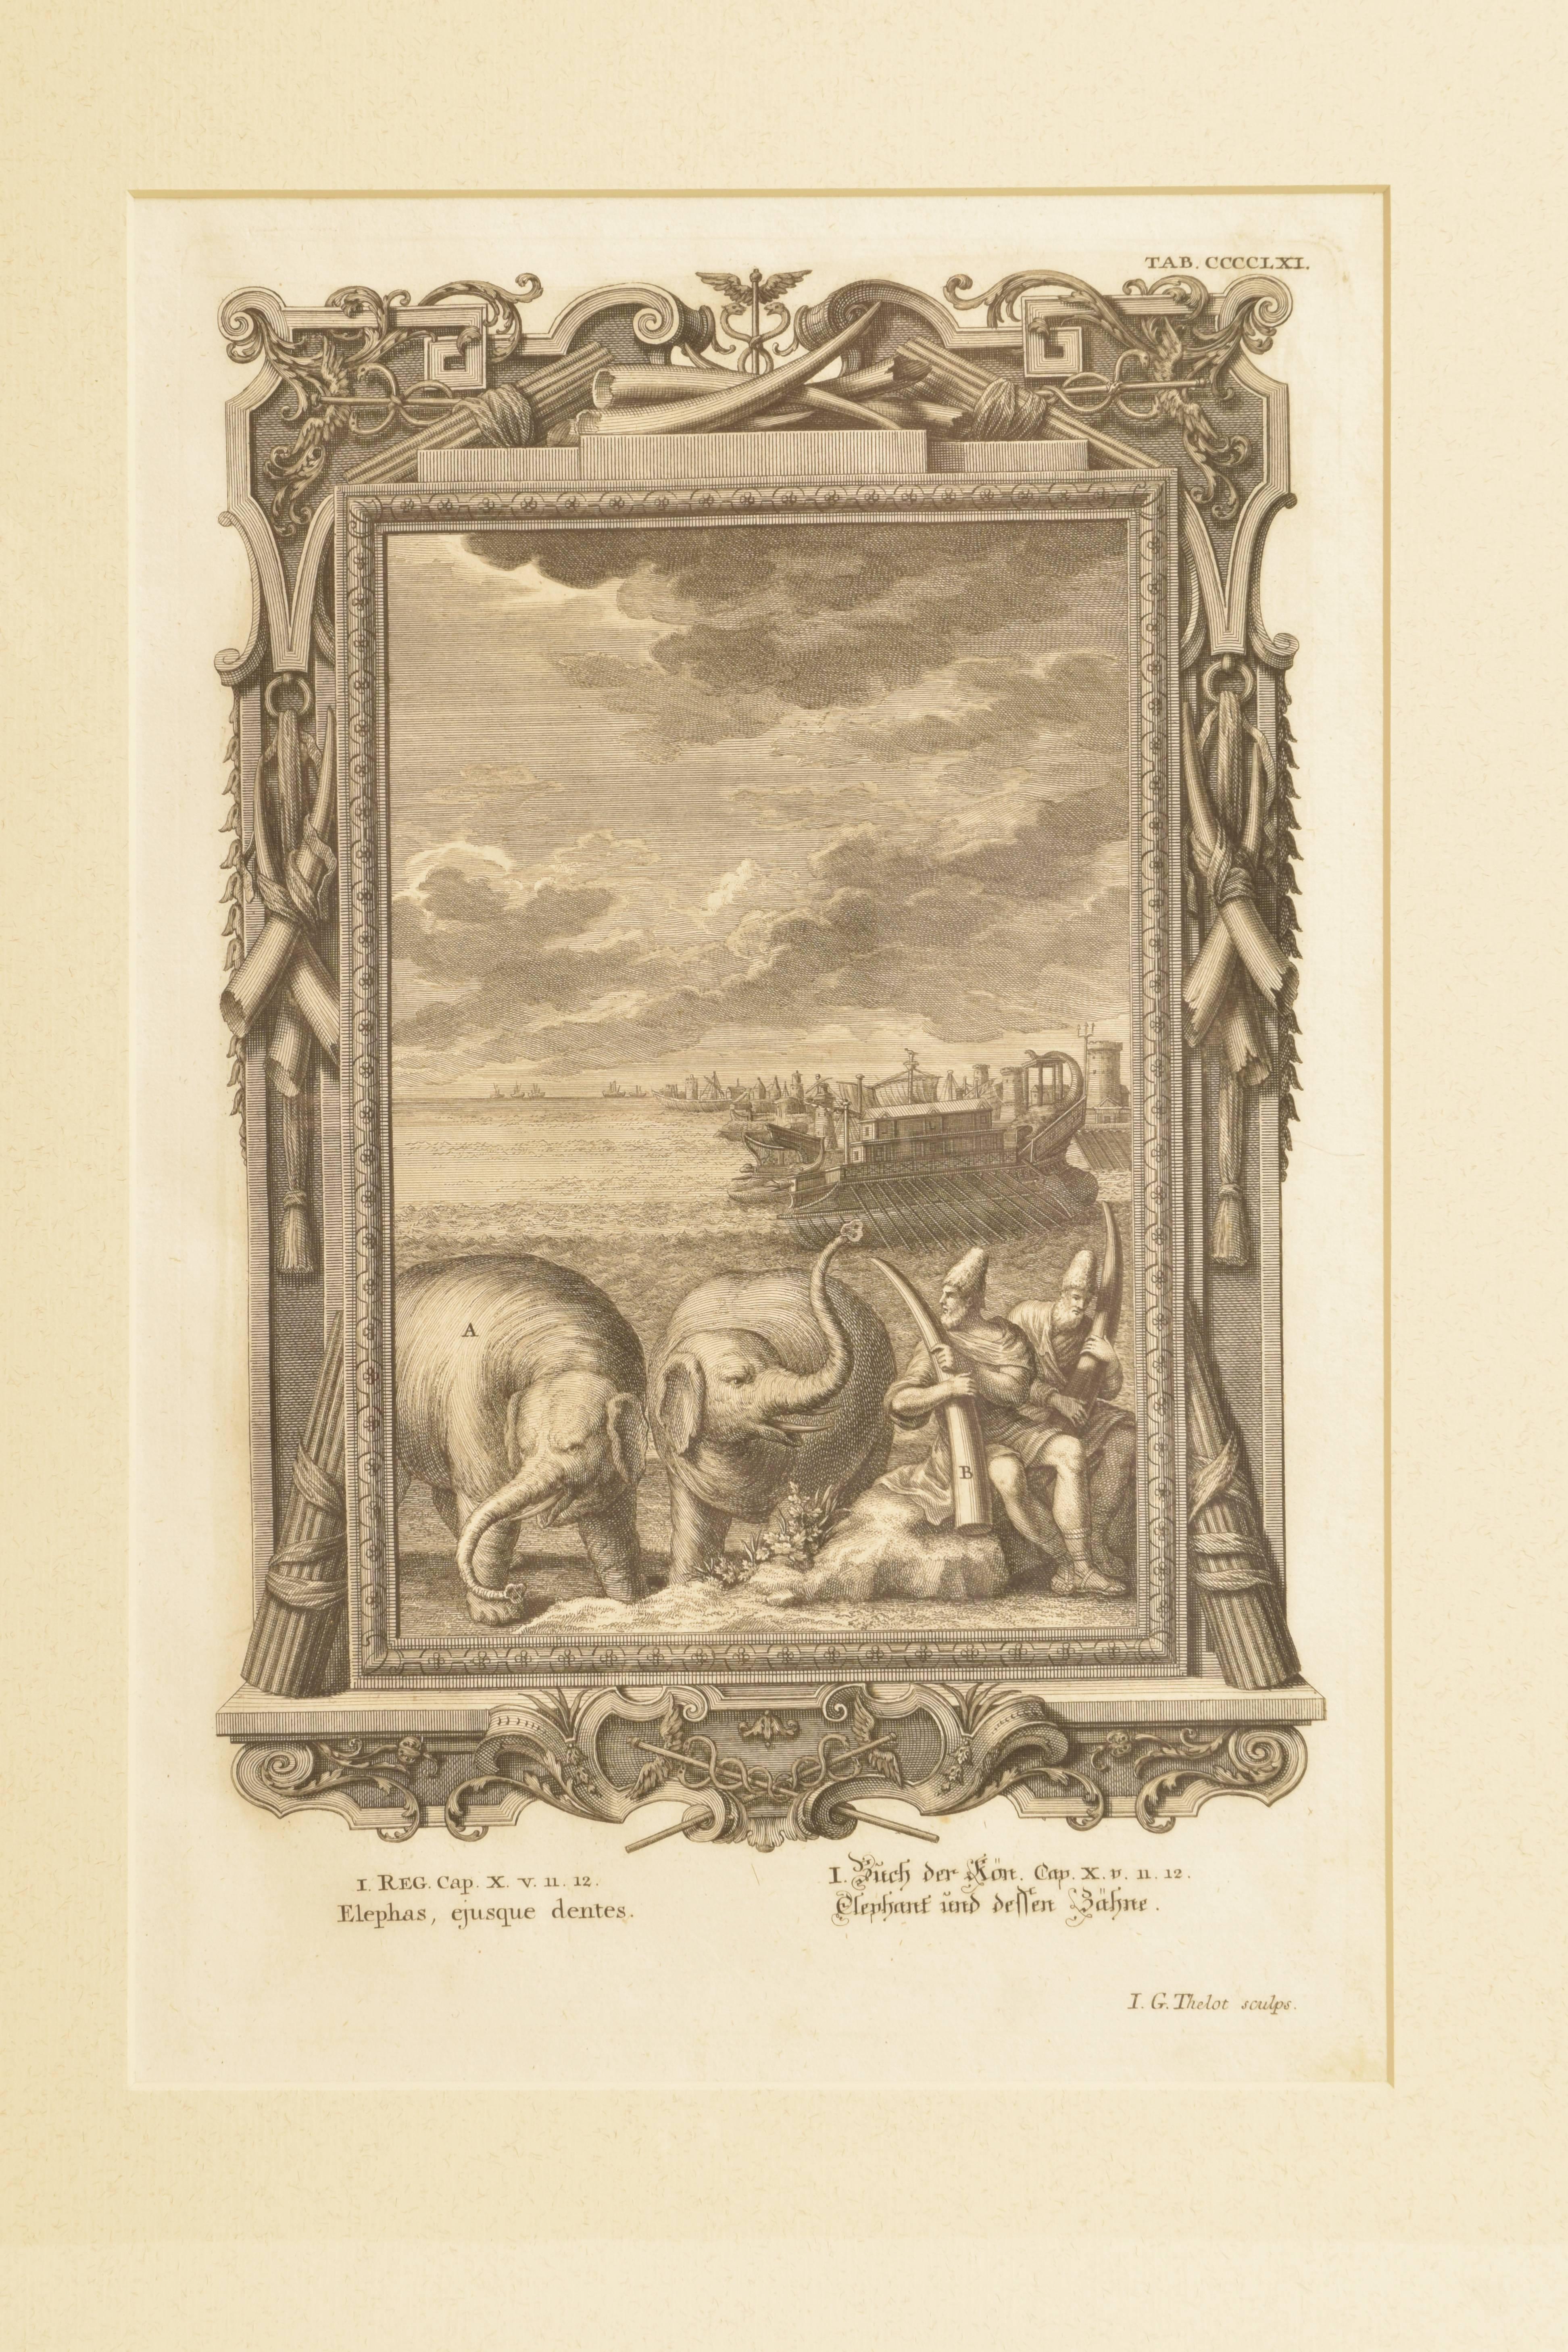 An antique copper plate engraving of a pair of elephants and a nautical scene.